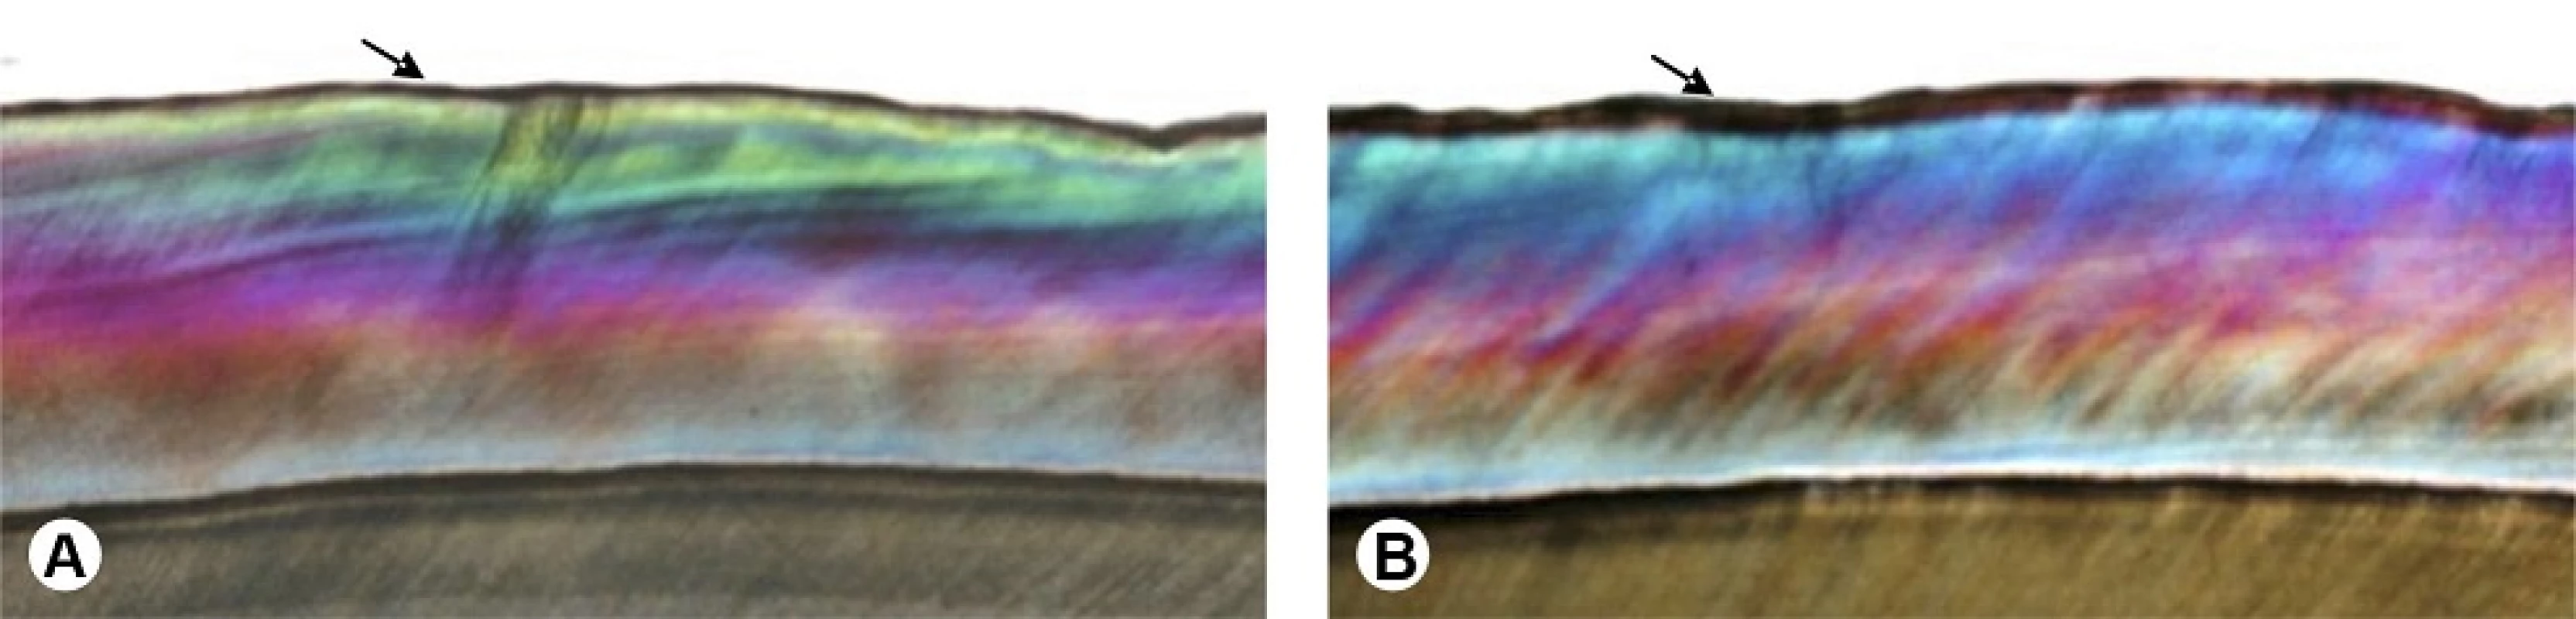 Polarized light microscopy analysis. Image obtained by polarized light microscopy (25×). A: Specimen subjected to cariogenic challenge. Uniform demineralization of the enamel surface (arrow) may be observed. B: Group II specimen subjected to cariogenic challenge and bleaching procedure, arrow indicates a thicker area of negative birefringence, to an average depth of up to 83 μm, without apparent cavitation.